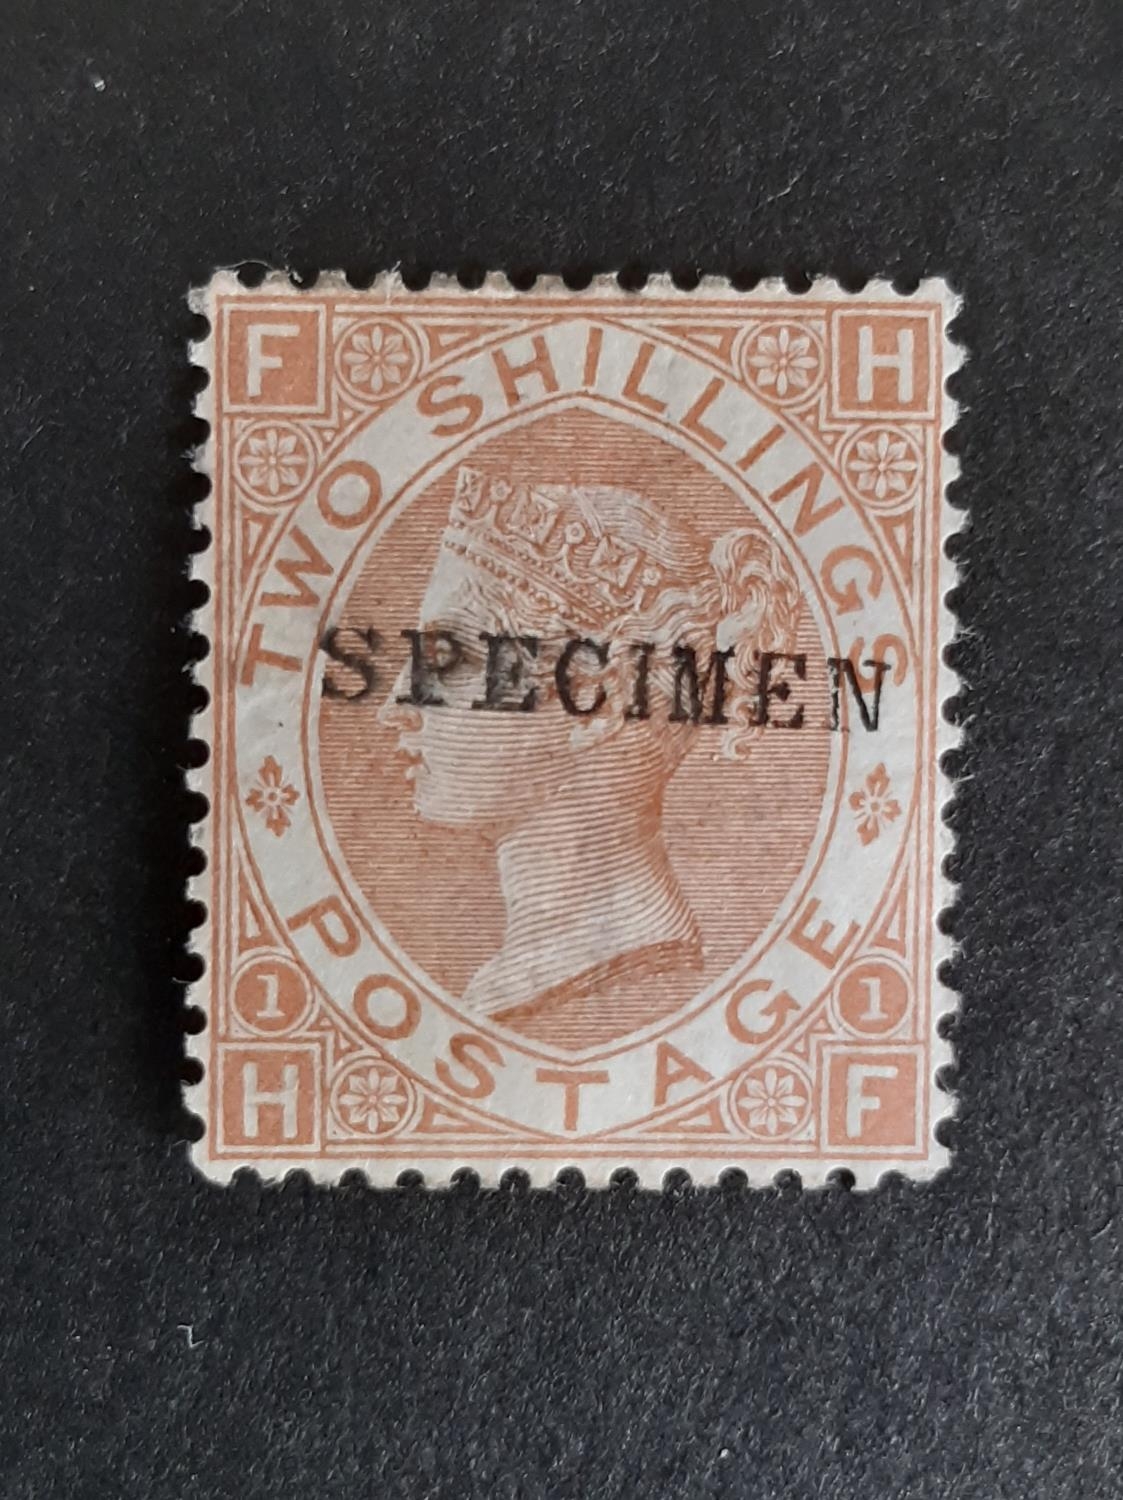 1867-80 QV SG121s 2/- brown Specimen opt. Superb LMM example, perfect centering and rich colour. A